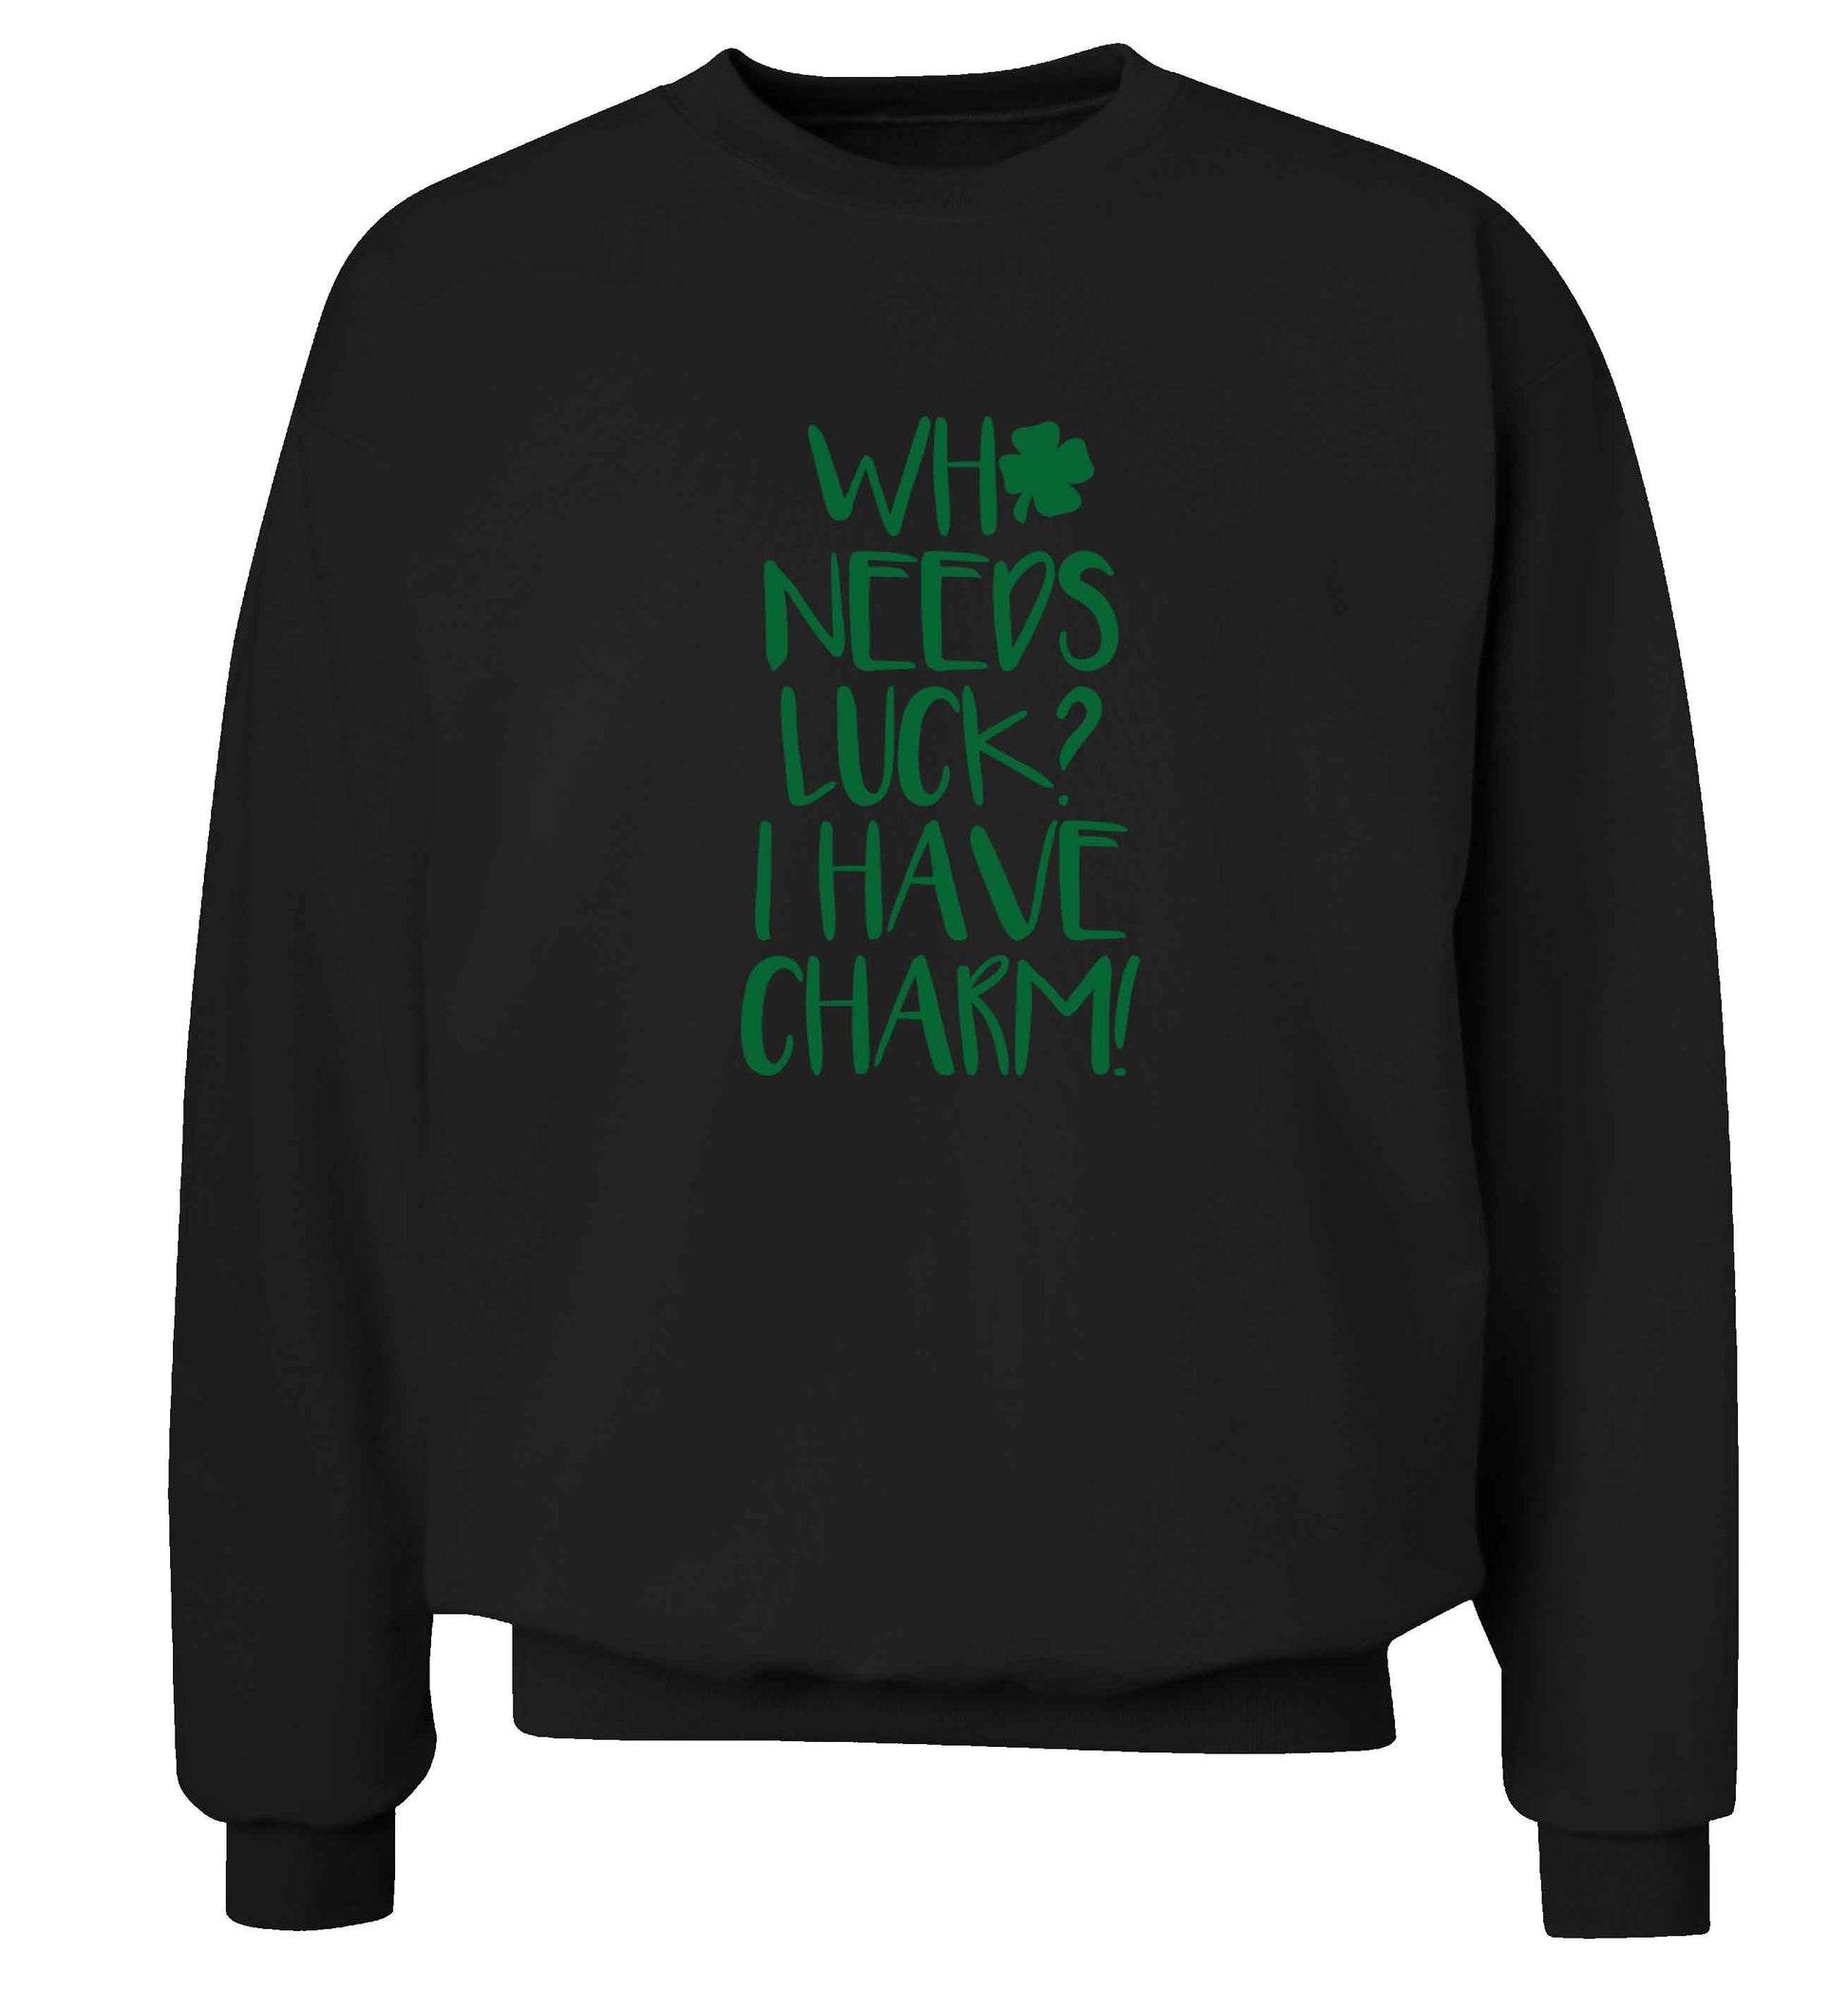 Who needs luck? I have charm! adult's unisex black sweater 2XL